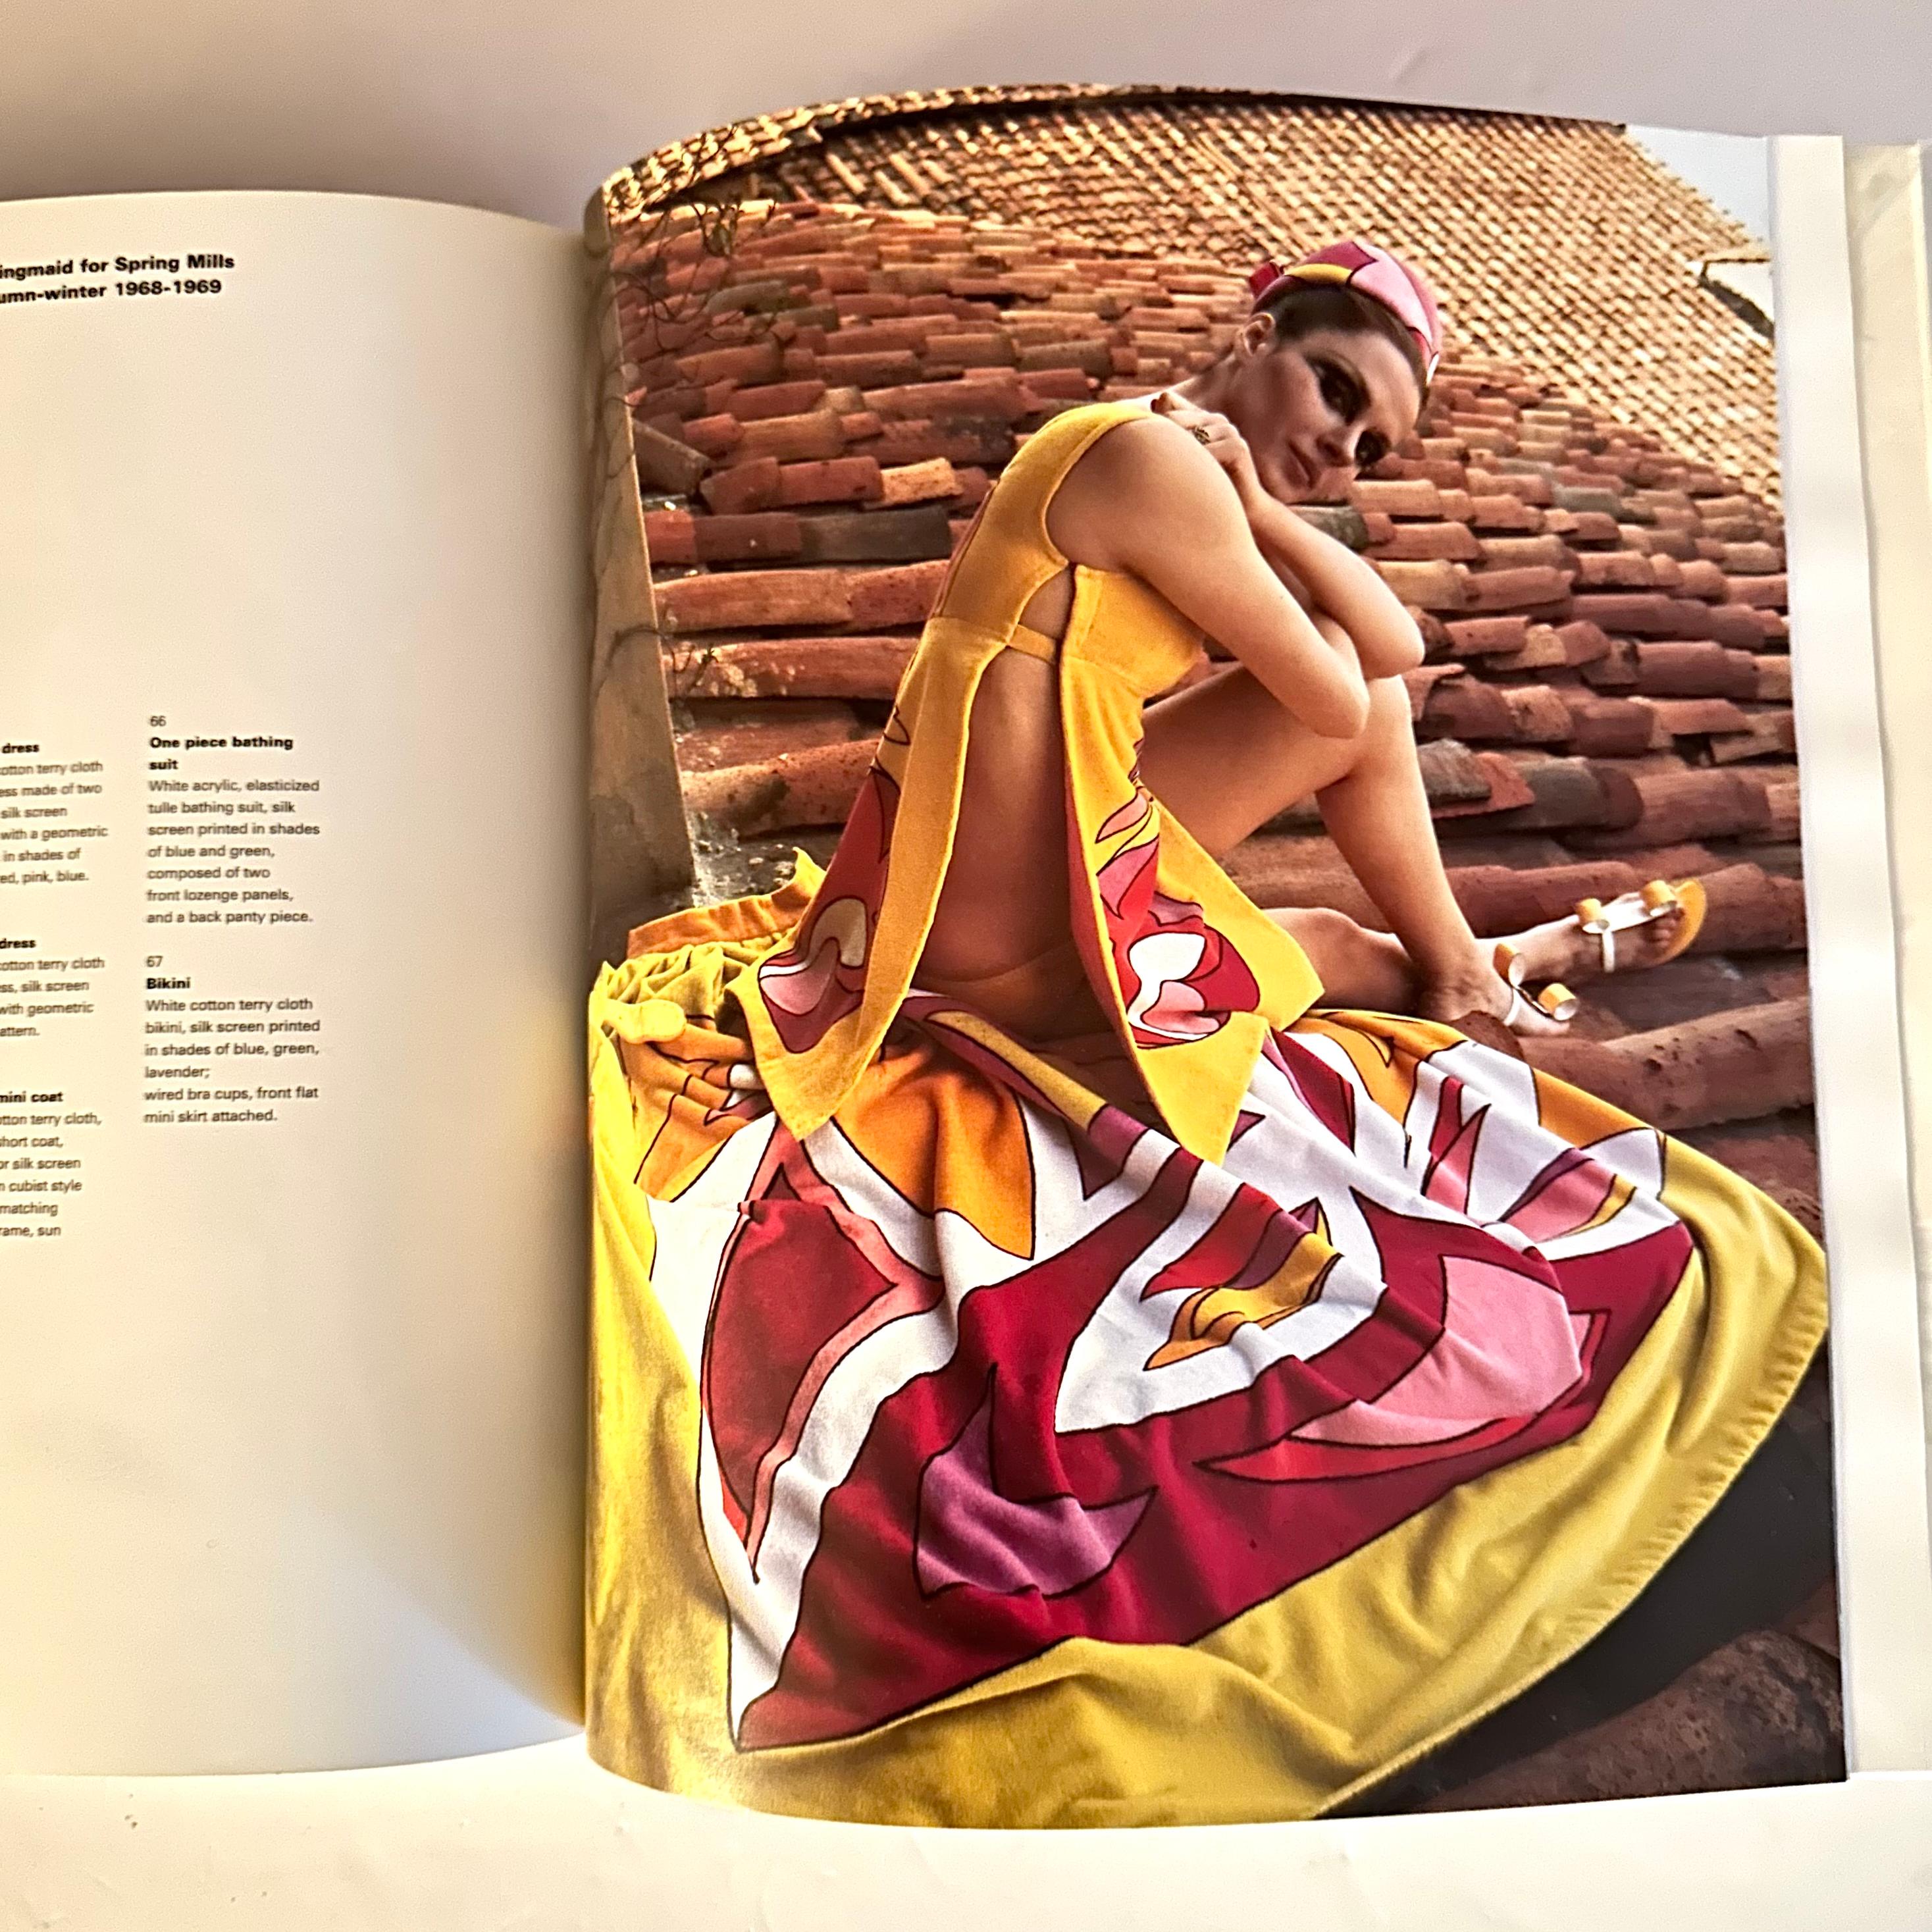 Published by Skira Editore, 1st edition, Firenze, 1996. Softcover with English text. 

This catalogue was published alongside a retrospective exhibition on Emilio Pucci’s tremendous career in fashion, held at the Florence Biennale in 1996. A man of